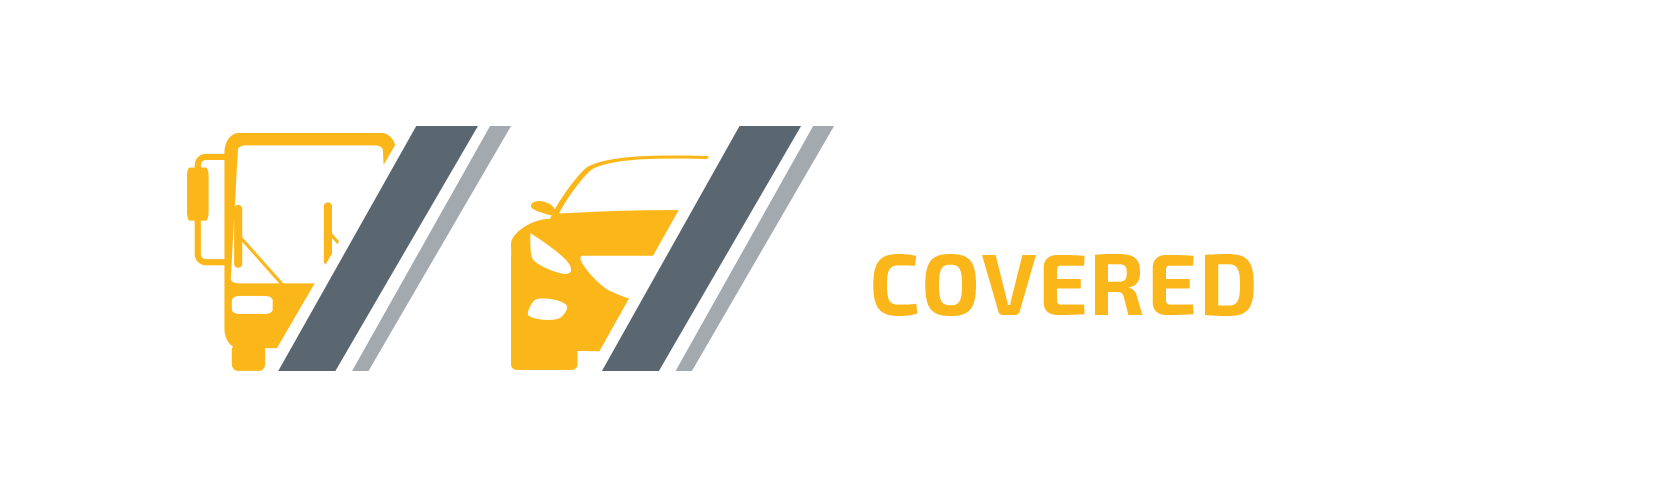 image says "covered"